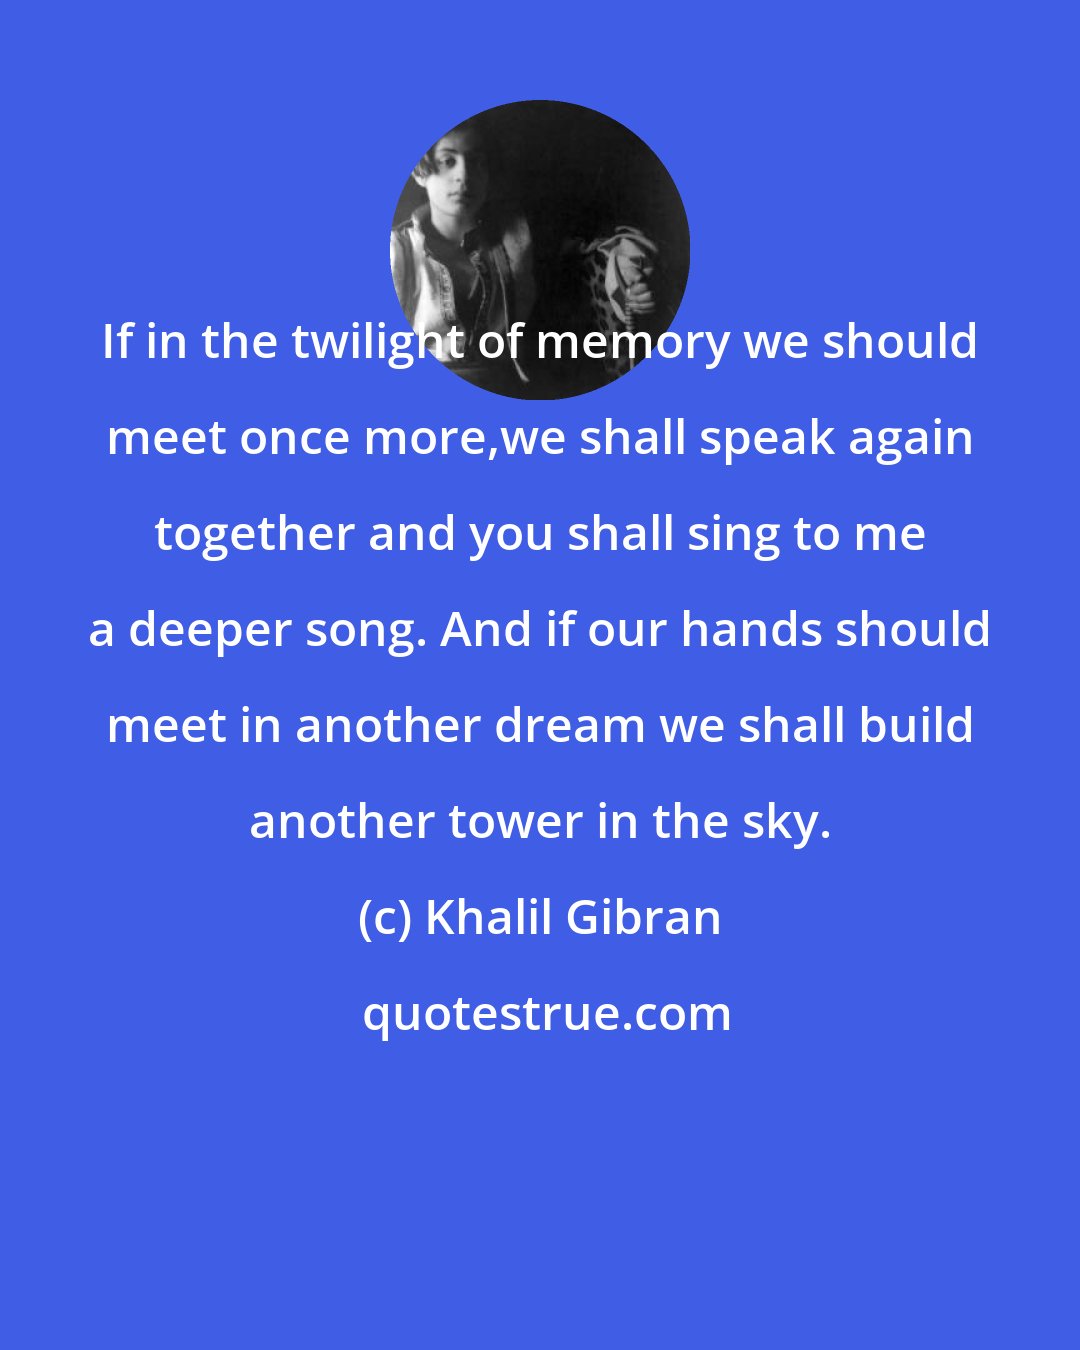 Khalil Gibran: If in the twilight of memory we should meet once more,we shall speak again together and you shall sing to me a deeper song. And if our hands should meet in another dream we shall build another tower in the sky.